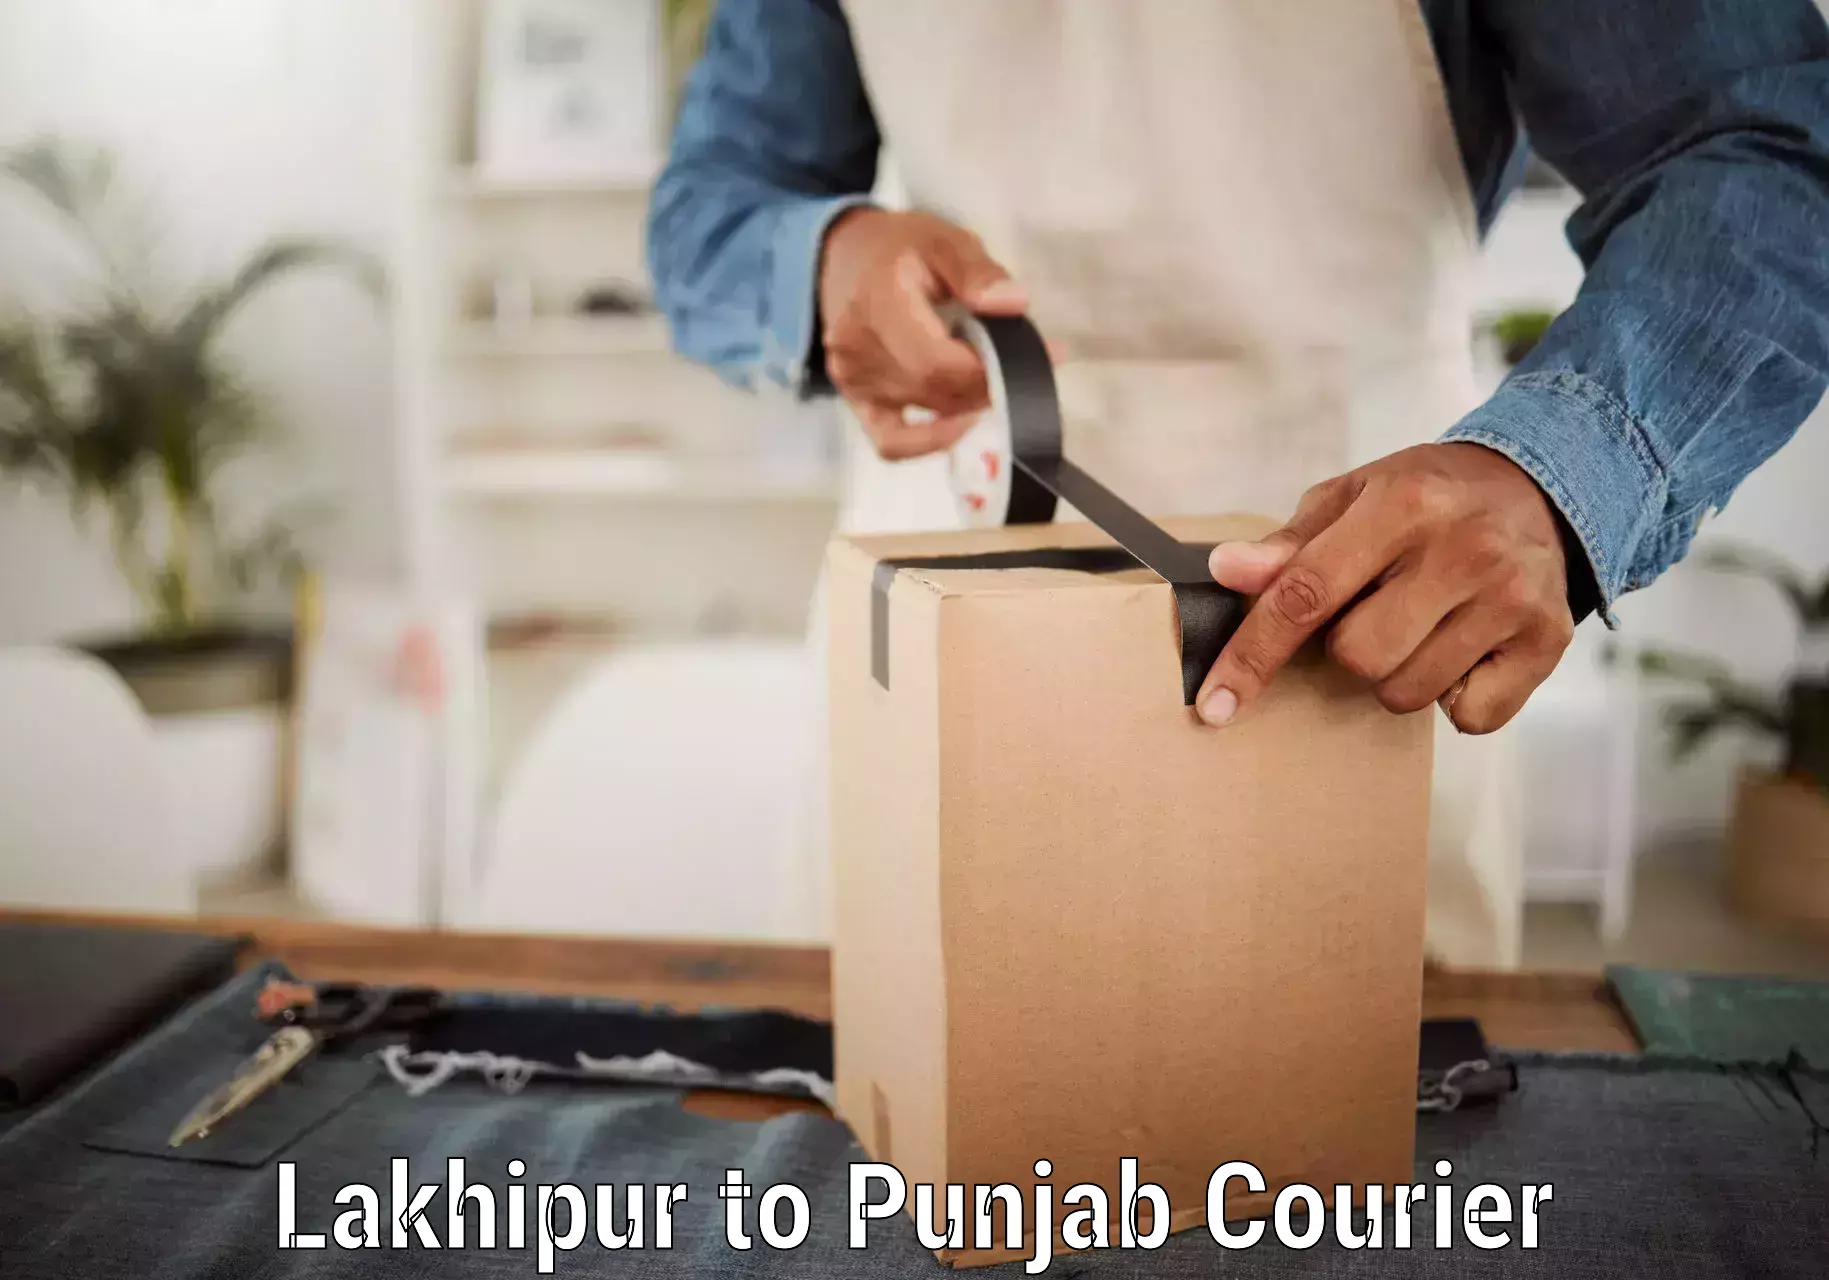 Smart courier technologies Lakhipur to Firozpur